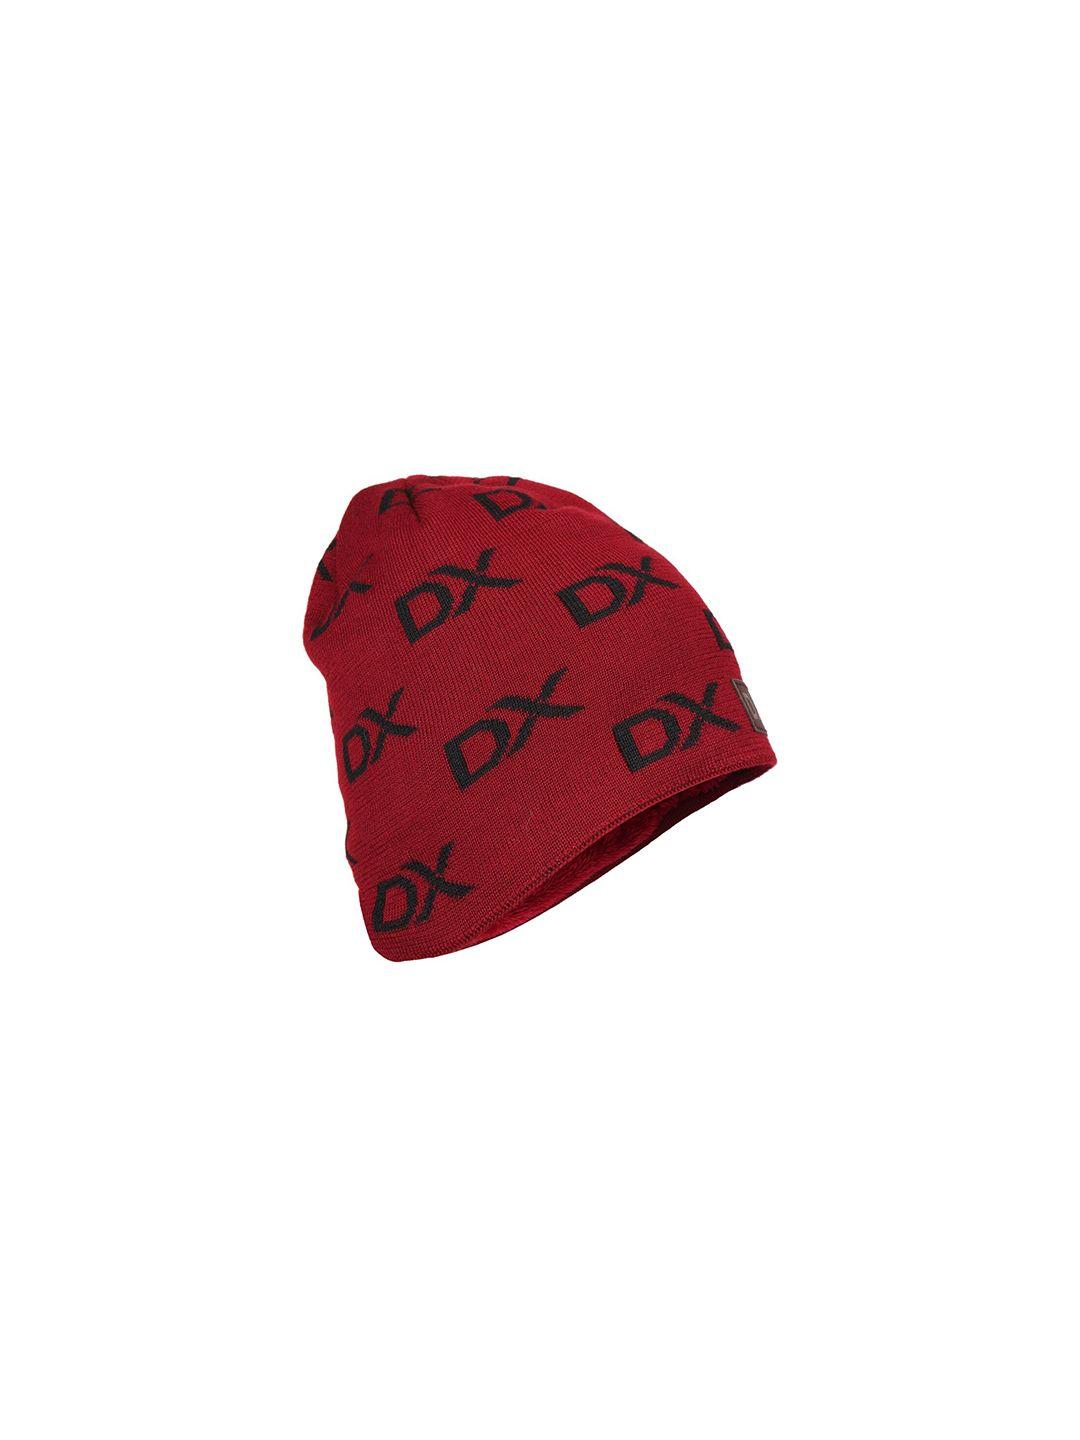 isweven-unisex-red-&-black-inside-fur-thick-beanie